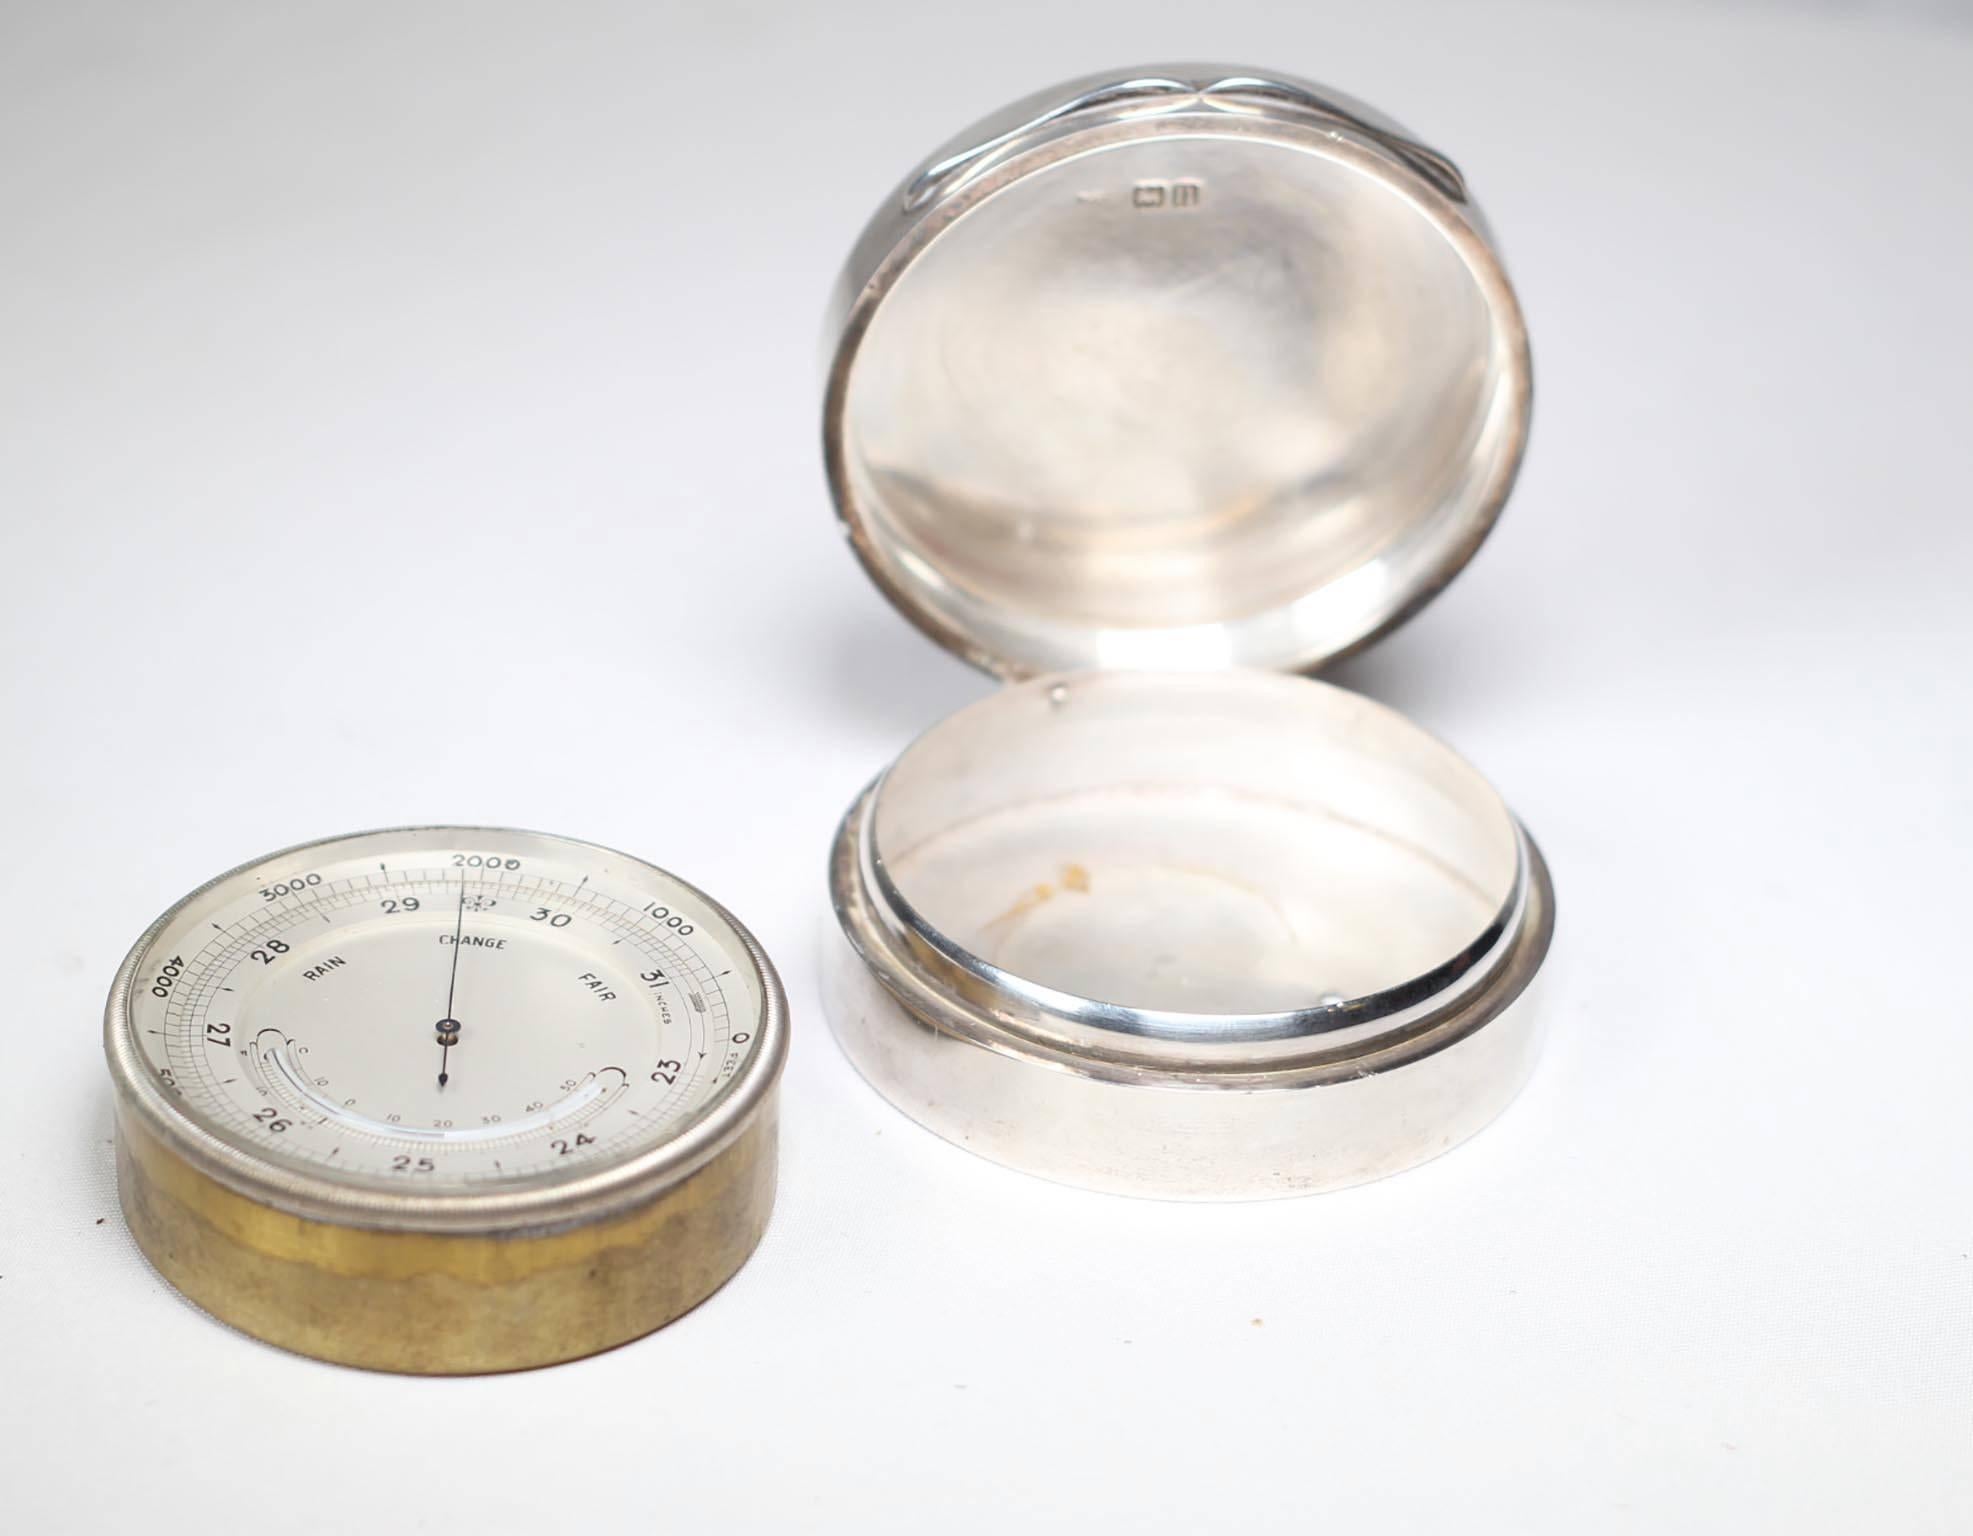 Victorian brass aneroid pocket barometer with altimeter scale, circa 1830-1890, 
in a later Edwardian sterling case with hallmarks for London, 1908.

Barometer features dial that points to 